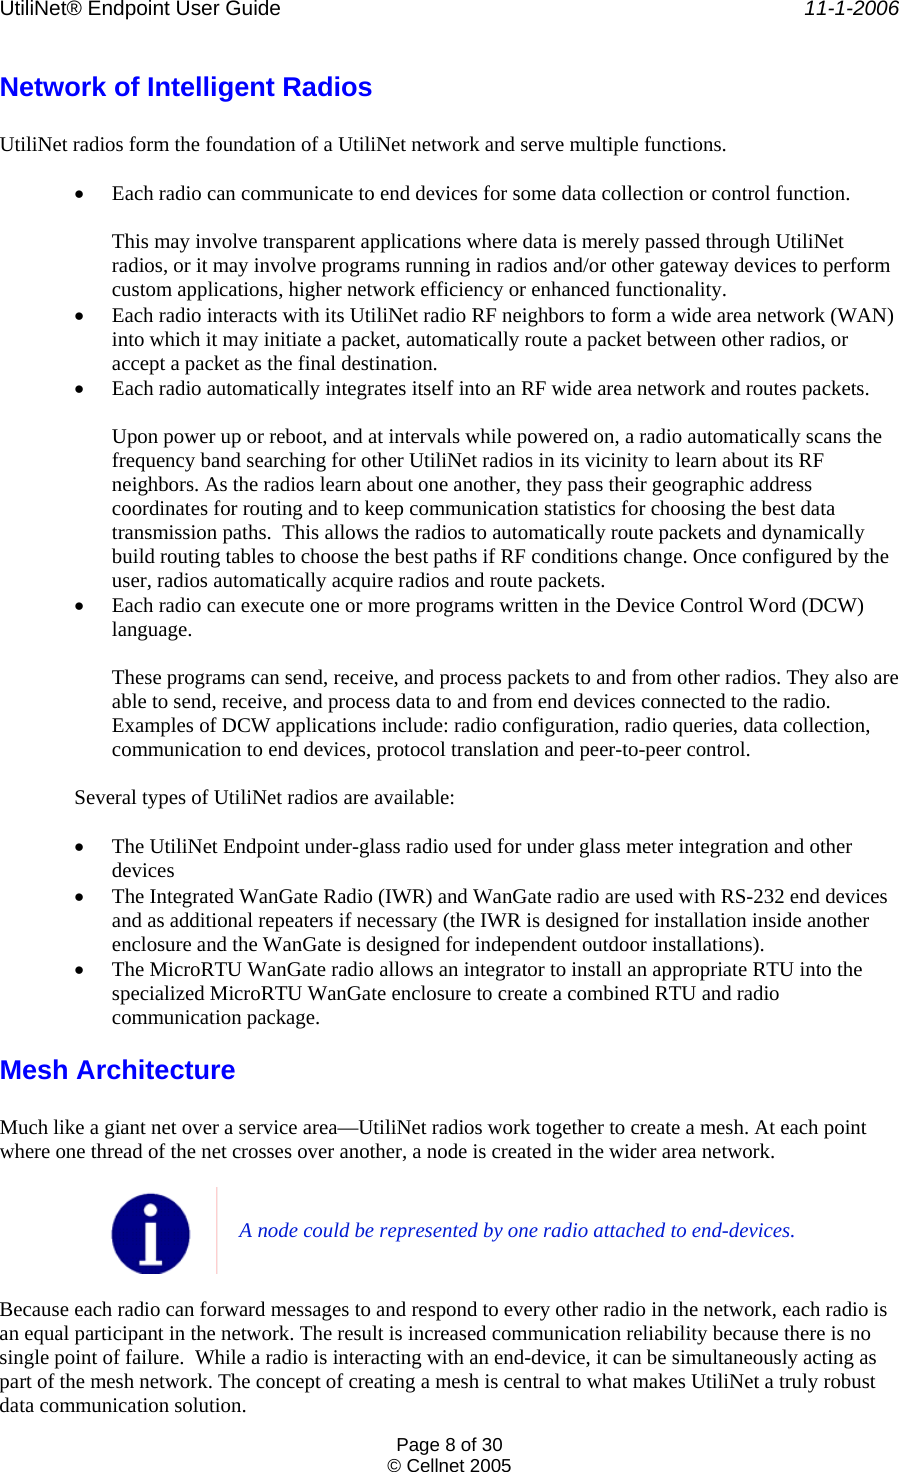 UtiliNet® Endpoint User Guide    11-1-2006 Page 8 of 30 © Cellnet 2005  Network of Intelligent Radios  UtiliNet radios form the foundation of a UtiliNet network and serve multiple functions.  • Each radio can communicate to end devices for some data collection or control function.  This may involve transparent applications where data is merely passed through UtiliNet radios, or it may involve programs running in radios and/or other gateway devices to perform custom applications, higher network efficiency or enhanced functionality. • Each radio interacts with its UtiliNet radio RF neighbors to form a wide area network (WAN) into which it may initiate a packet, automatically route a packet between other radios, or accept a packet as the final destination. • Each radio automatically integrates itself into an RF wide area network and routes packets.  Upon power up or reboot, and at intervals while powered on, a radio automatically scans the frequency band searching for other UtiliNet radios in its vicinity to learn about its RF neighbors. As the radios learn about one another, they pass their geographic address coordinates for routing and to keep communication statistics for choosing the best data transmission paths.  This allows the radios to automatically route packets and dynamically build routing tables to choose the best paths if RF conditions change. Once configured by the user, radios automatically acquire radios and route packets. • Each radio can execute one or more programs written in the Device Control Word (DCW) language.  These programs can send, receive, and process packets to and from other radios. They also are able to send, receive, and process data to and from end devices connected to the radio. Examples of DCW applications include: radio configuration, radio queries, data collection, communication to end devices, protocol translation and peer-to-peer control.  Several types of UtiliNet radios are available:  • The UtiliNet Endpoint under-glass radio used for under glass meter integration and other devices • The Integrated WanGate Radio (IWR) and WanGate radio are used with RS-232 end devices and as additional repeaters if necessary (the IWR is designed for installation inside another enclosure and the WanGate is designed for independent outdoor installations). • The MicroRTU WanGate radio allows an integrator to install an appropriate RTU into the specialized MicroRTU WanGate enclosure to create a combined RTU and radio communication package. Mesh Architecture  Much like a giant net over a service area—UtiliNet radios work together to create a mesh. At each point where one thread of the net crosses over another, a node is created in the wider area network.   A node could be represented by one radio attached to end-devices.  Because each radio can forward messages to and respond to every other radio in the network, each radio is an equal participant in the network. The result is increased communication reliability because there is no single point of failure.  While a radio is interacting with an end-device, it can be simultaneously acting as part of the mesh network. The concept of creating a mesh is central to what makes UtiliNet a truly robust data communication solution. 